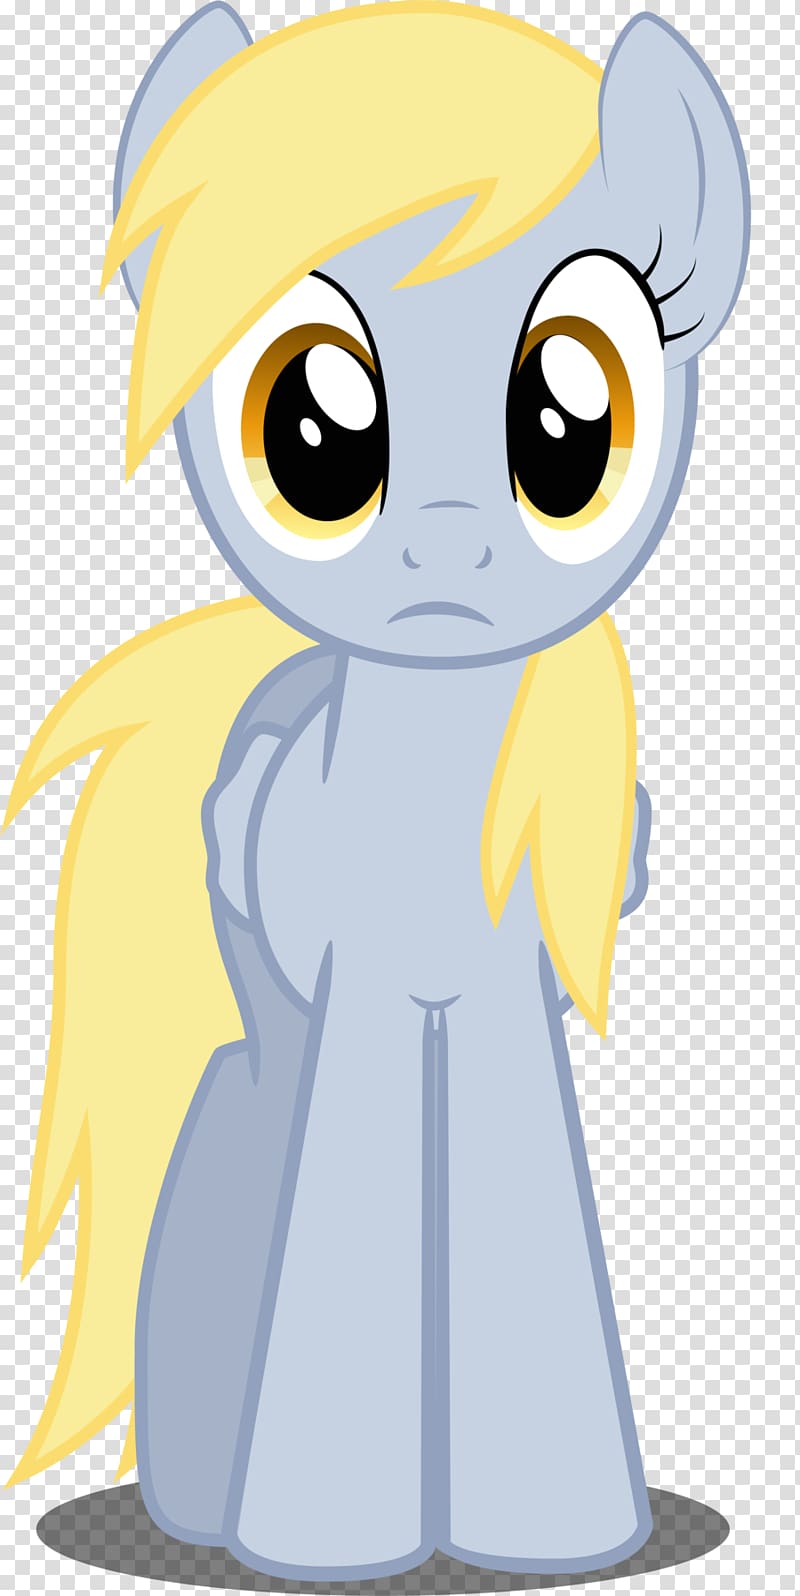 Derpy Hooves Rainbow Dash Pony Pinkie Pie Twilight Sparkle, obscured child transparent background PNG clipart